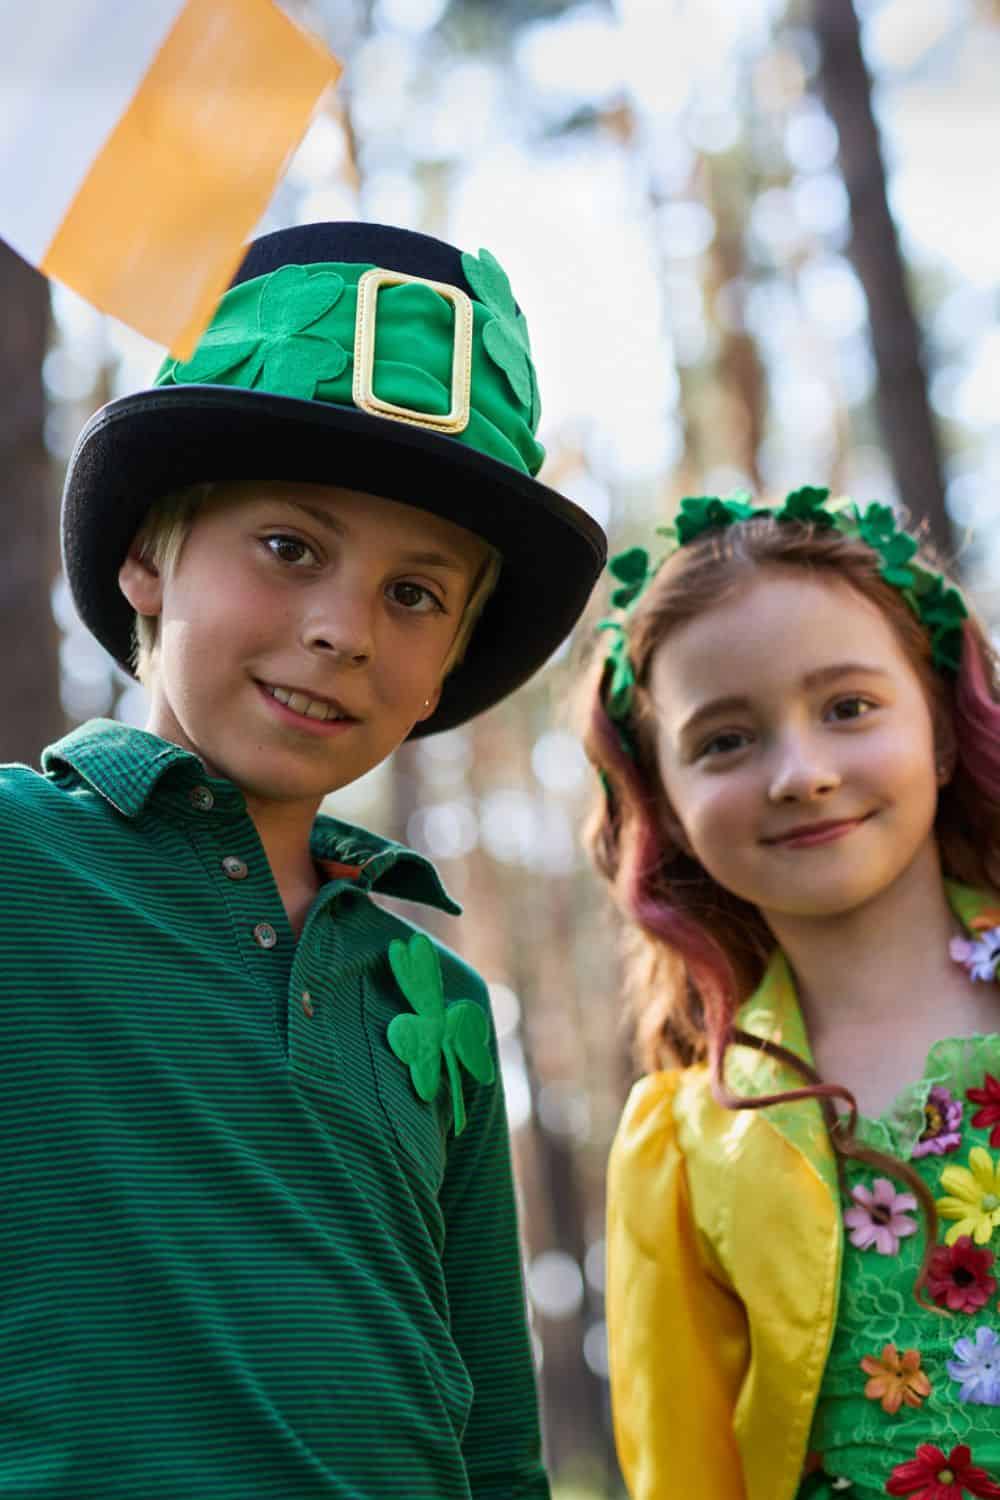 21 Interesting Facts About St. Patrick’s Day for Kids